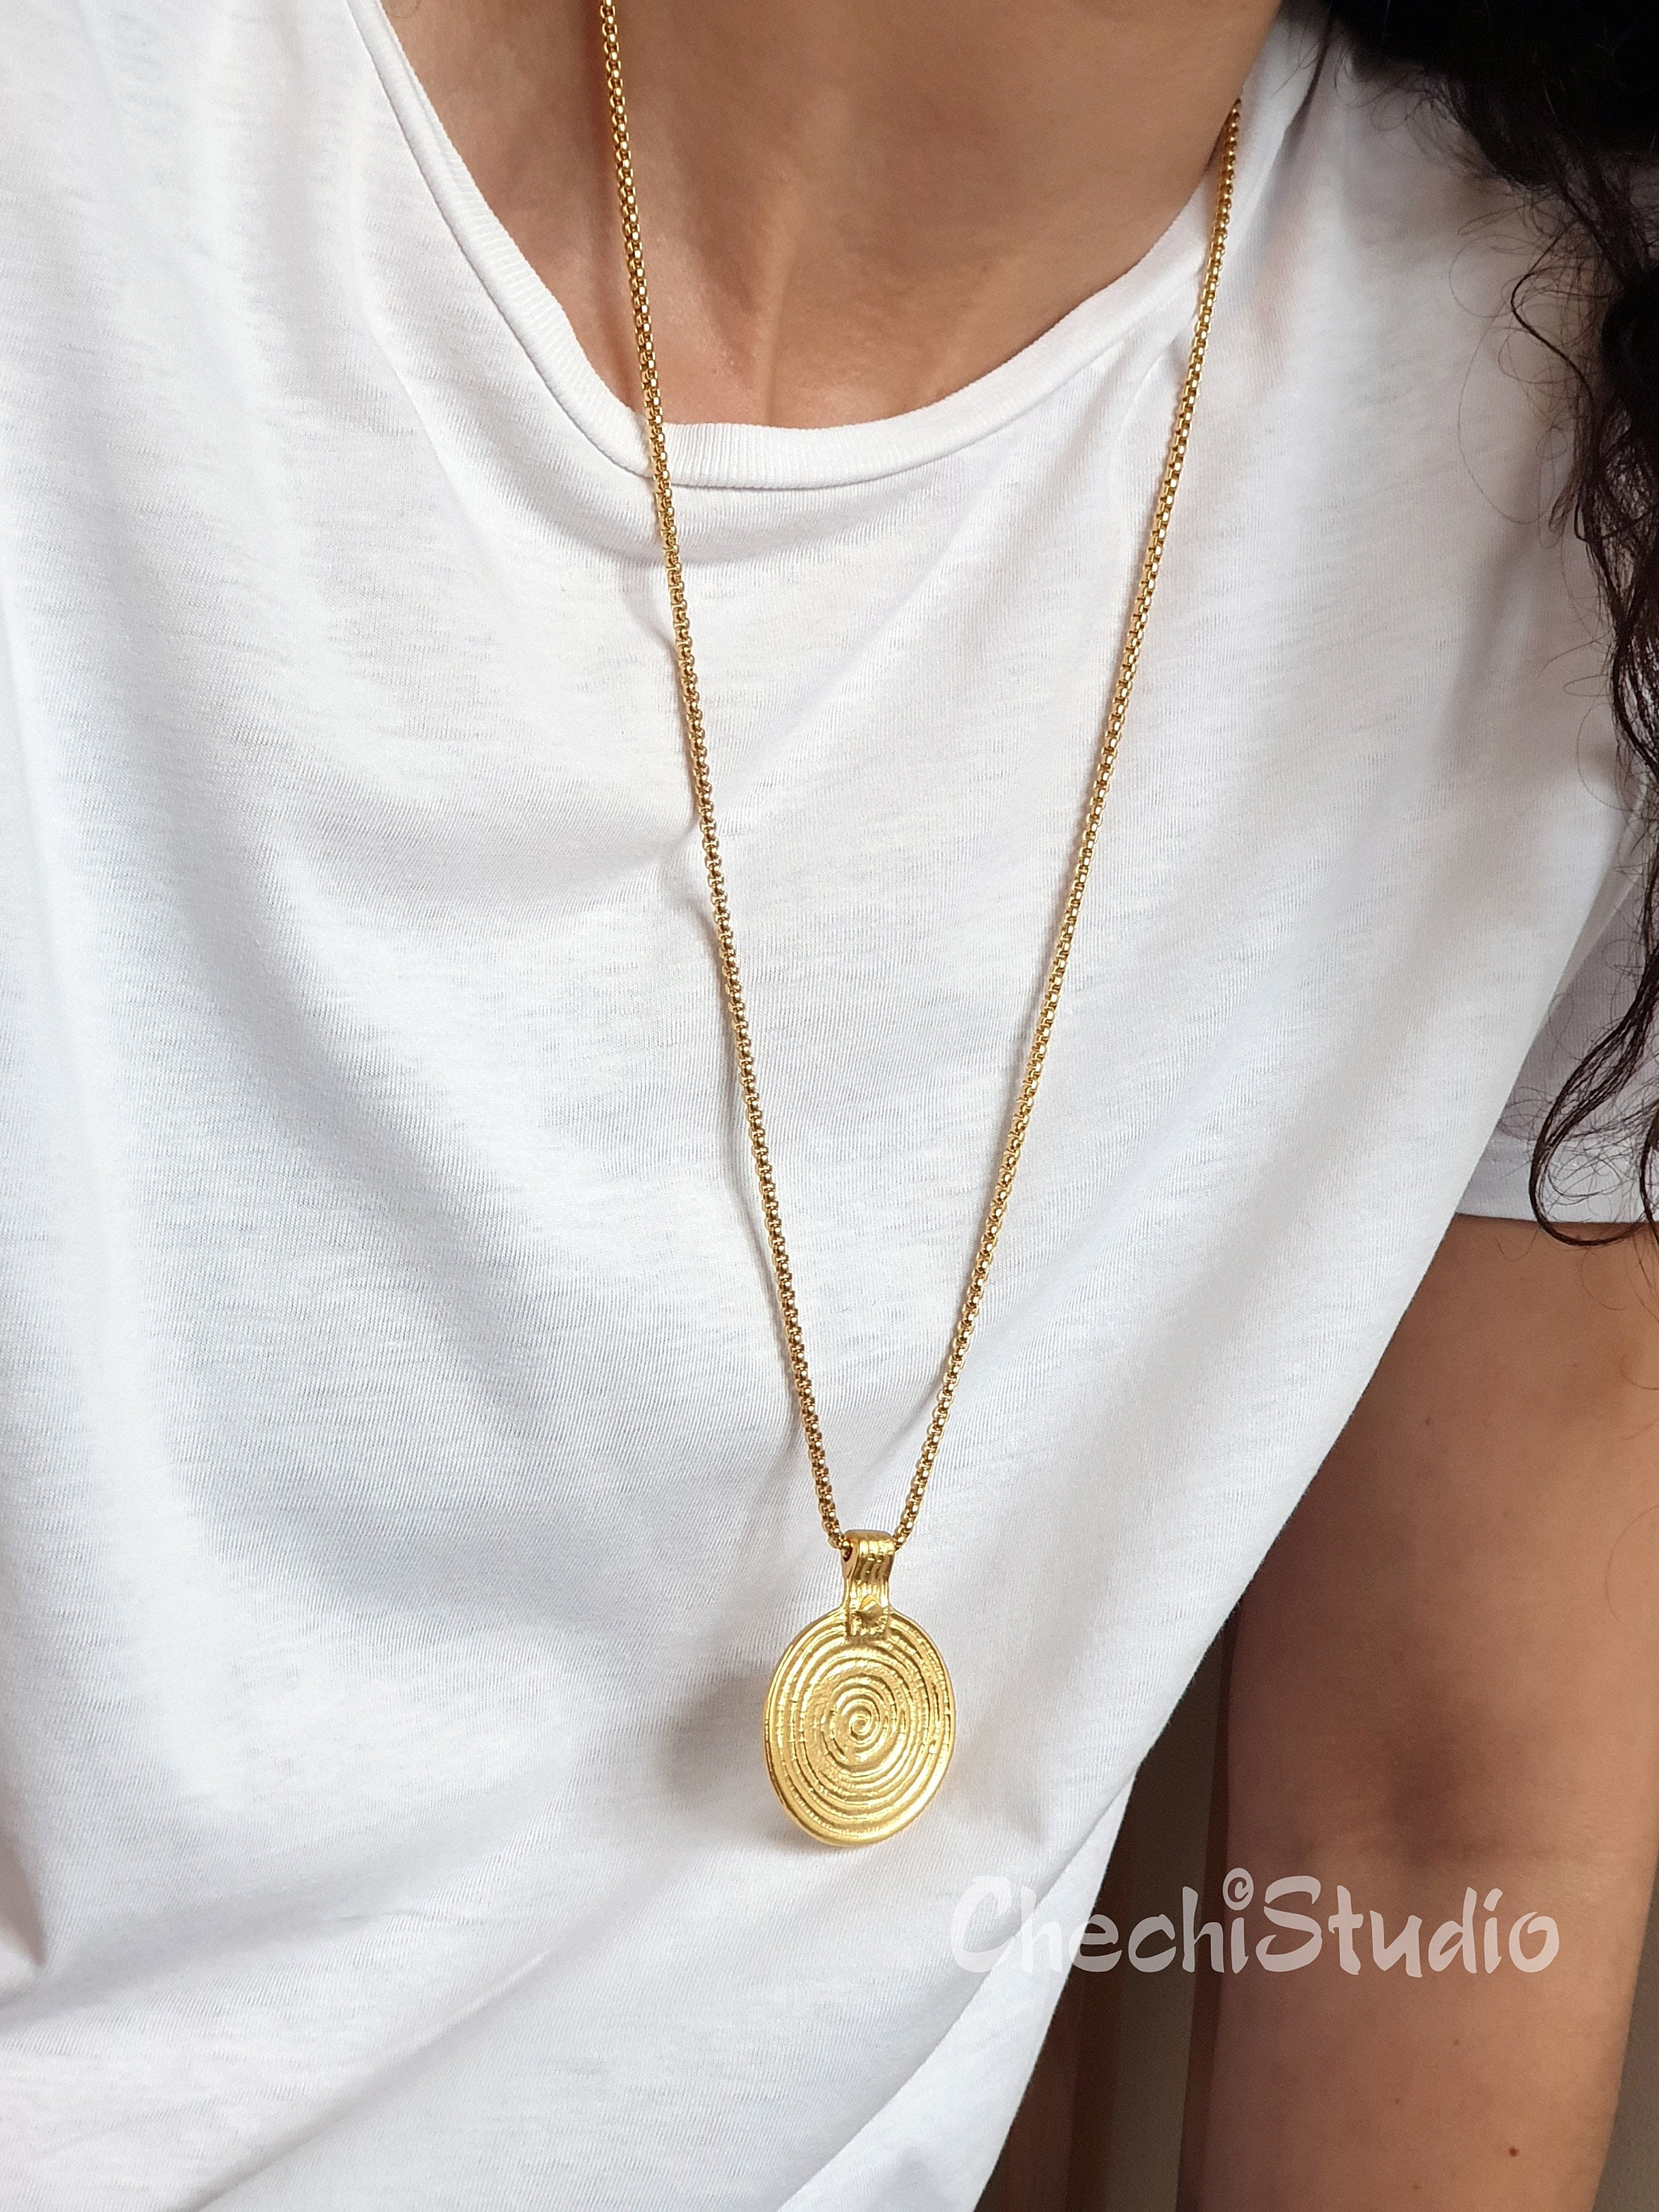 Necklaces for Women | Ana Luisa Jewelry